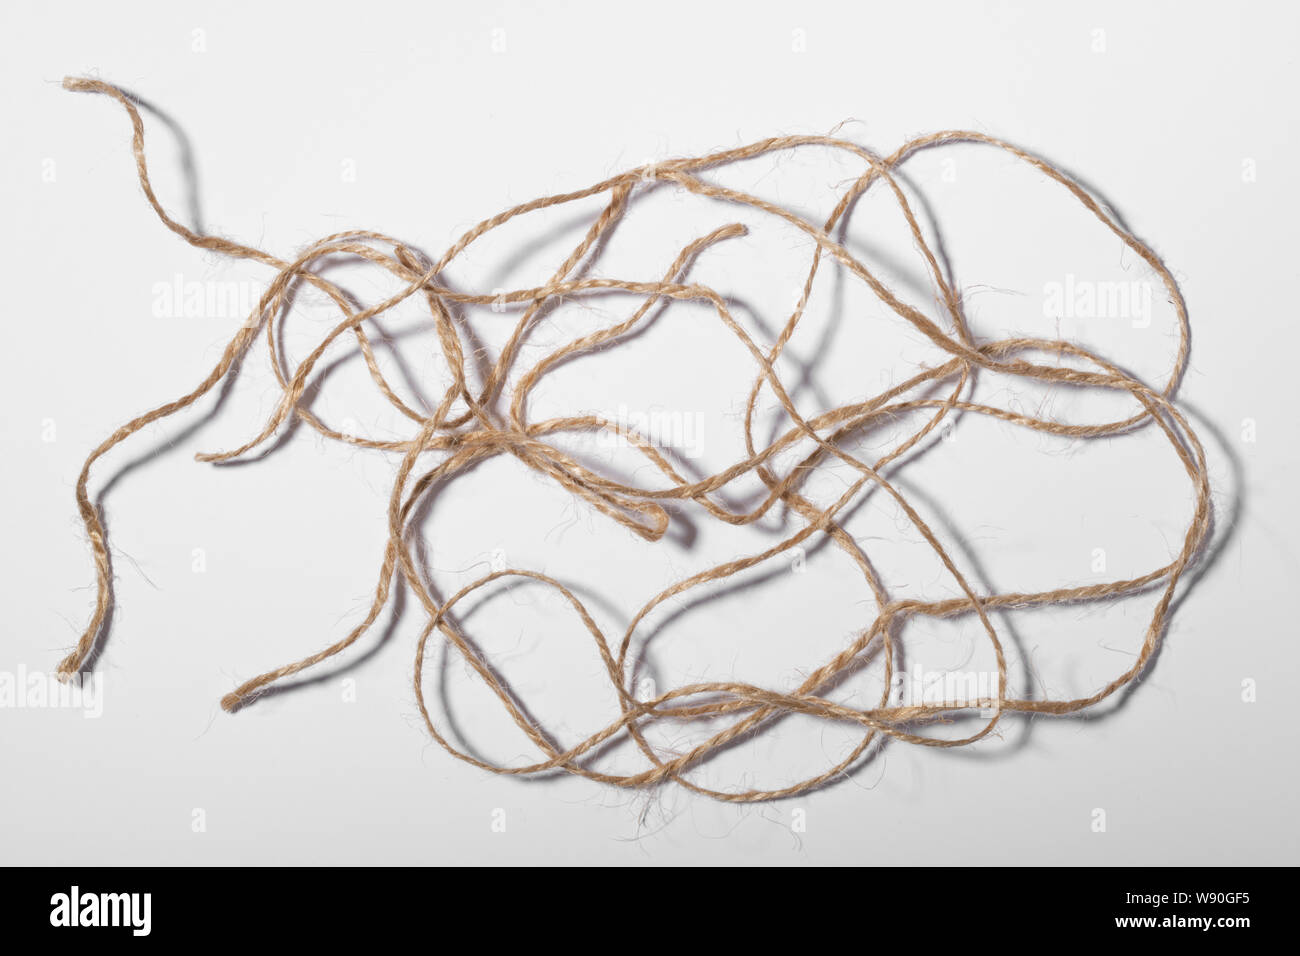 Several pieces of brown string on a white background Stock Photo